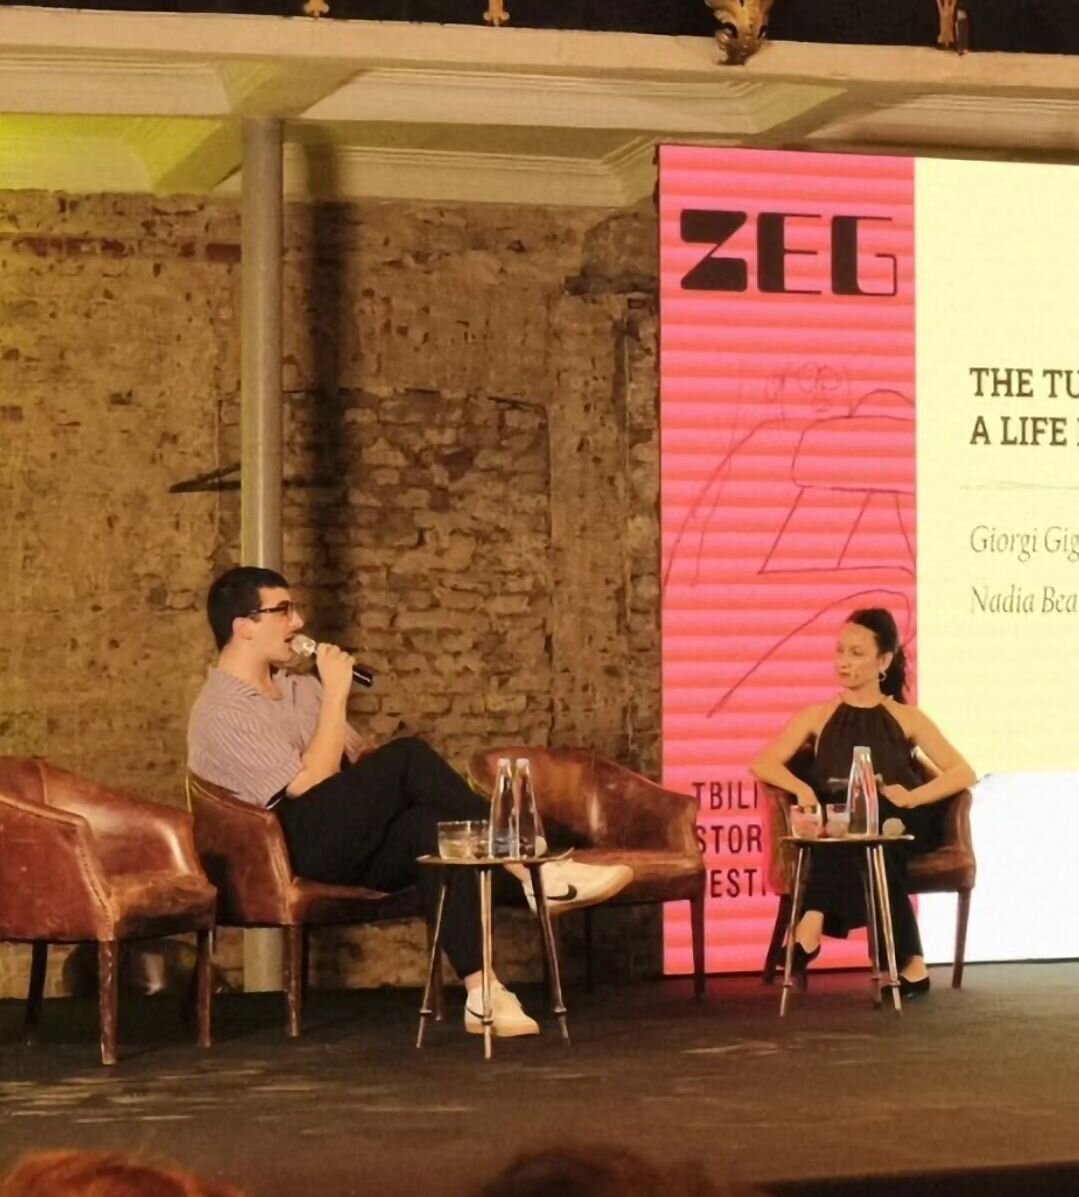 A happy sigh. Just the greatest delight to give the keynote speech at @zegfest this year about music and my beloved Tbilisi, and to be in conversation with Giorgi Gigashvili who blessed us with a performance of Chopin's last ballade, an obvious choic